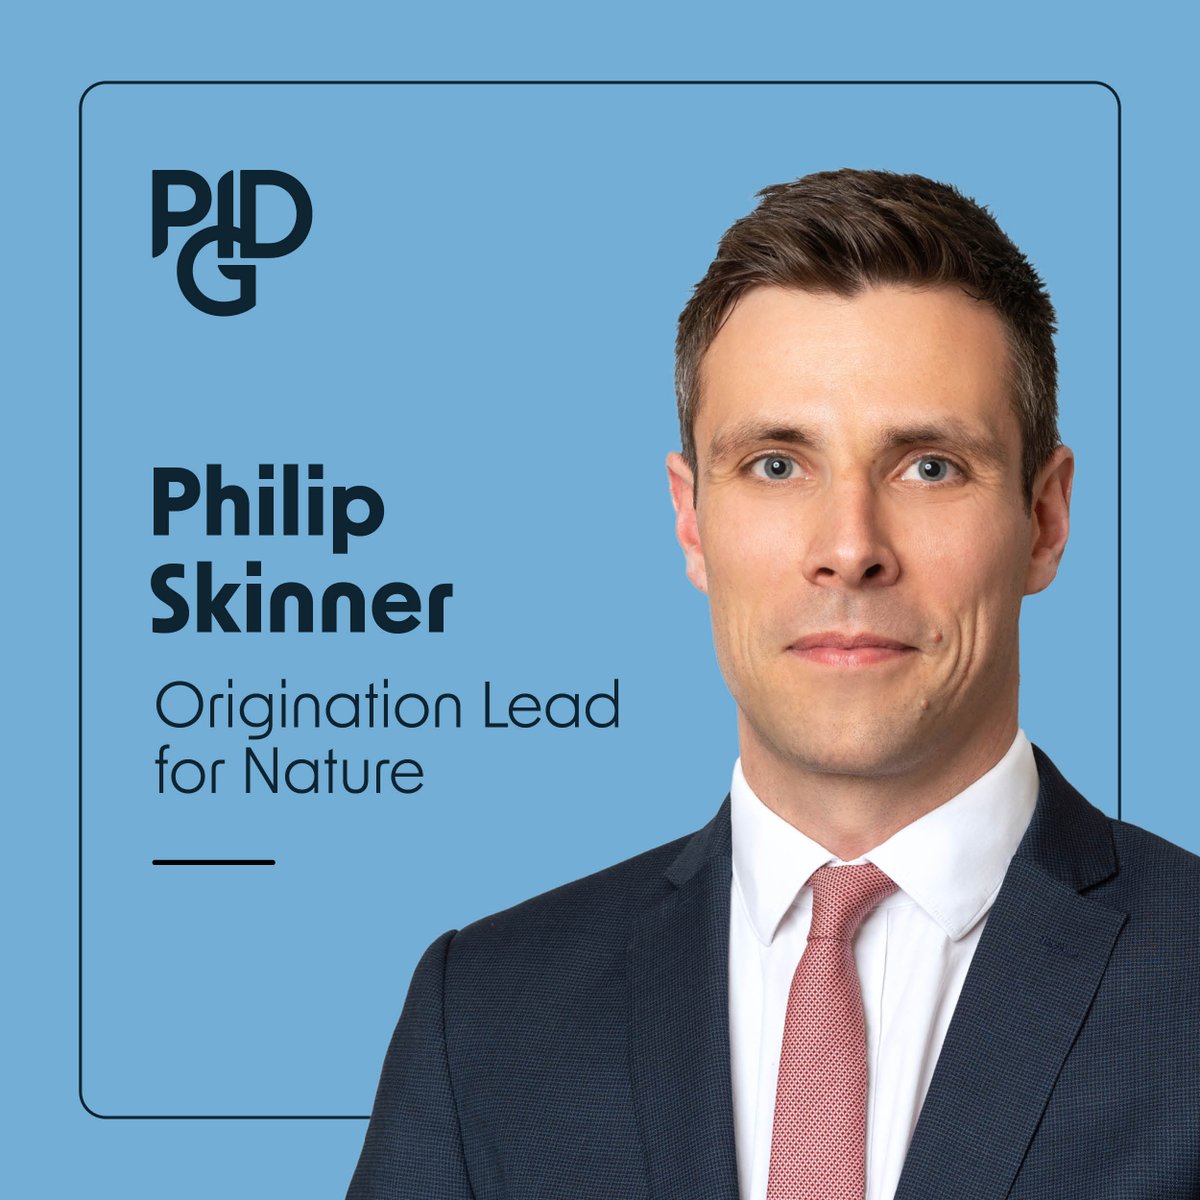 We are pleased to announce Philip Skinner as the PIDG Origination Lead for Nature, leading investment strategy for nature-based projects.